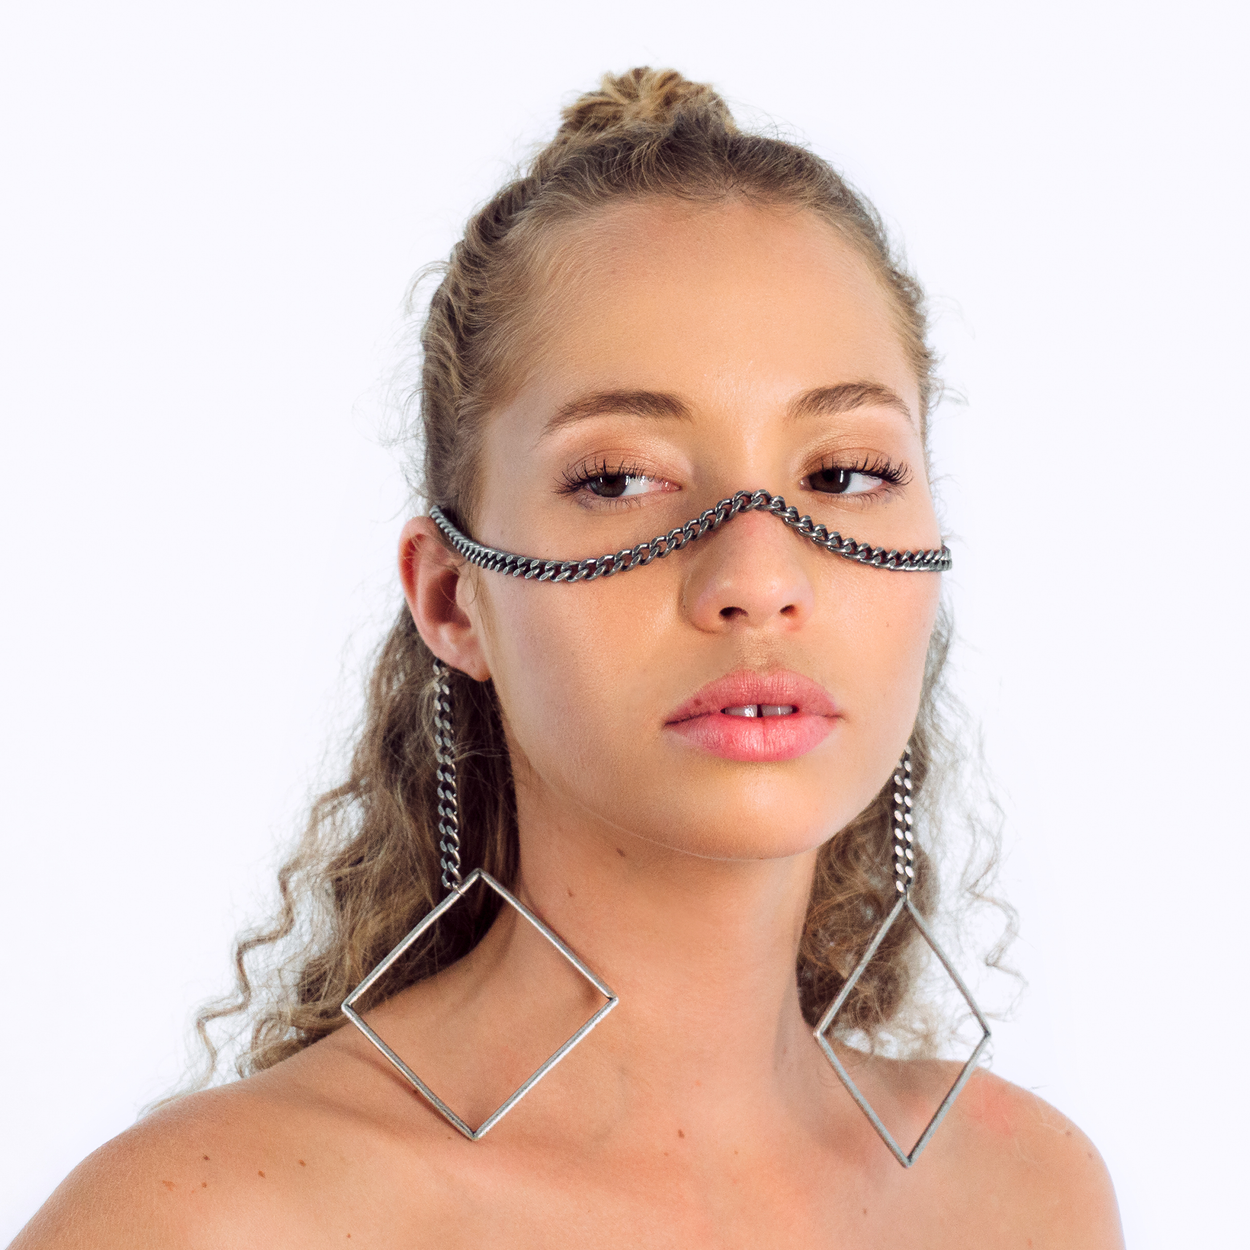 Genghis Catena | Face Chain | Face Jewelry | Antique Silver with Geometric Squares  | Sacred Geometry Collection